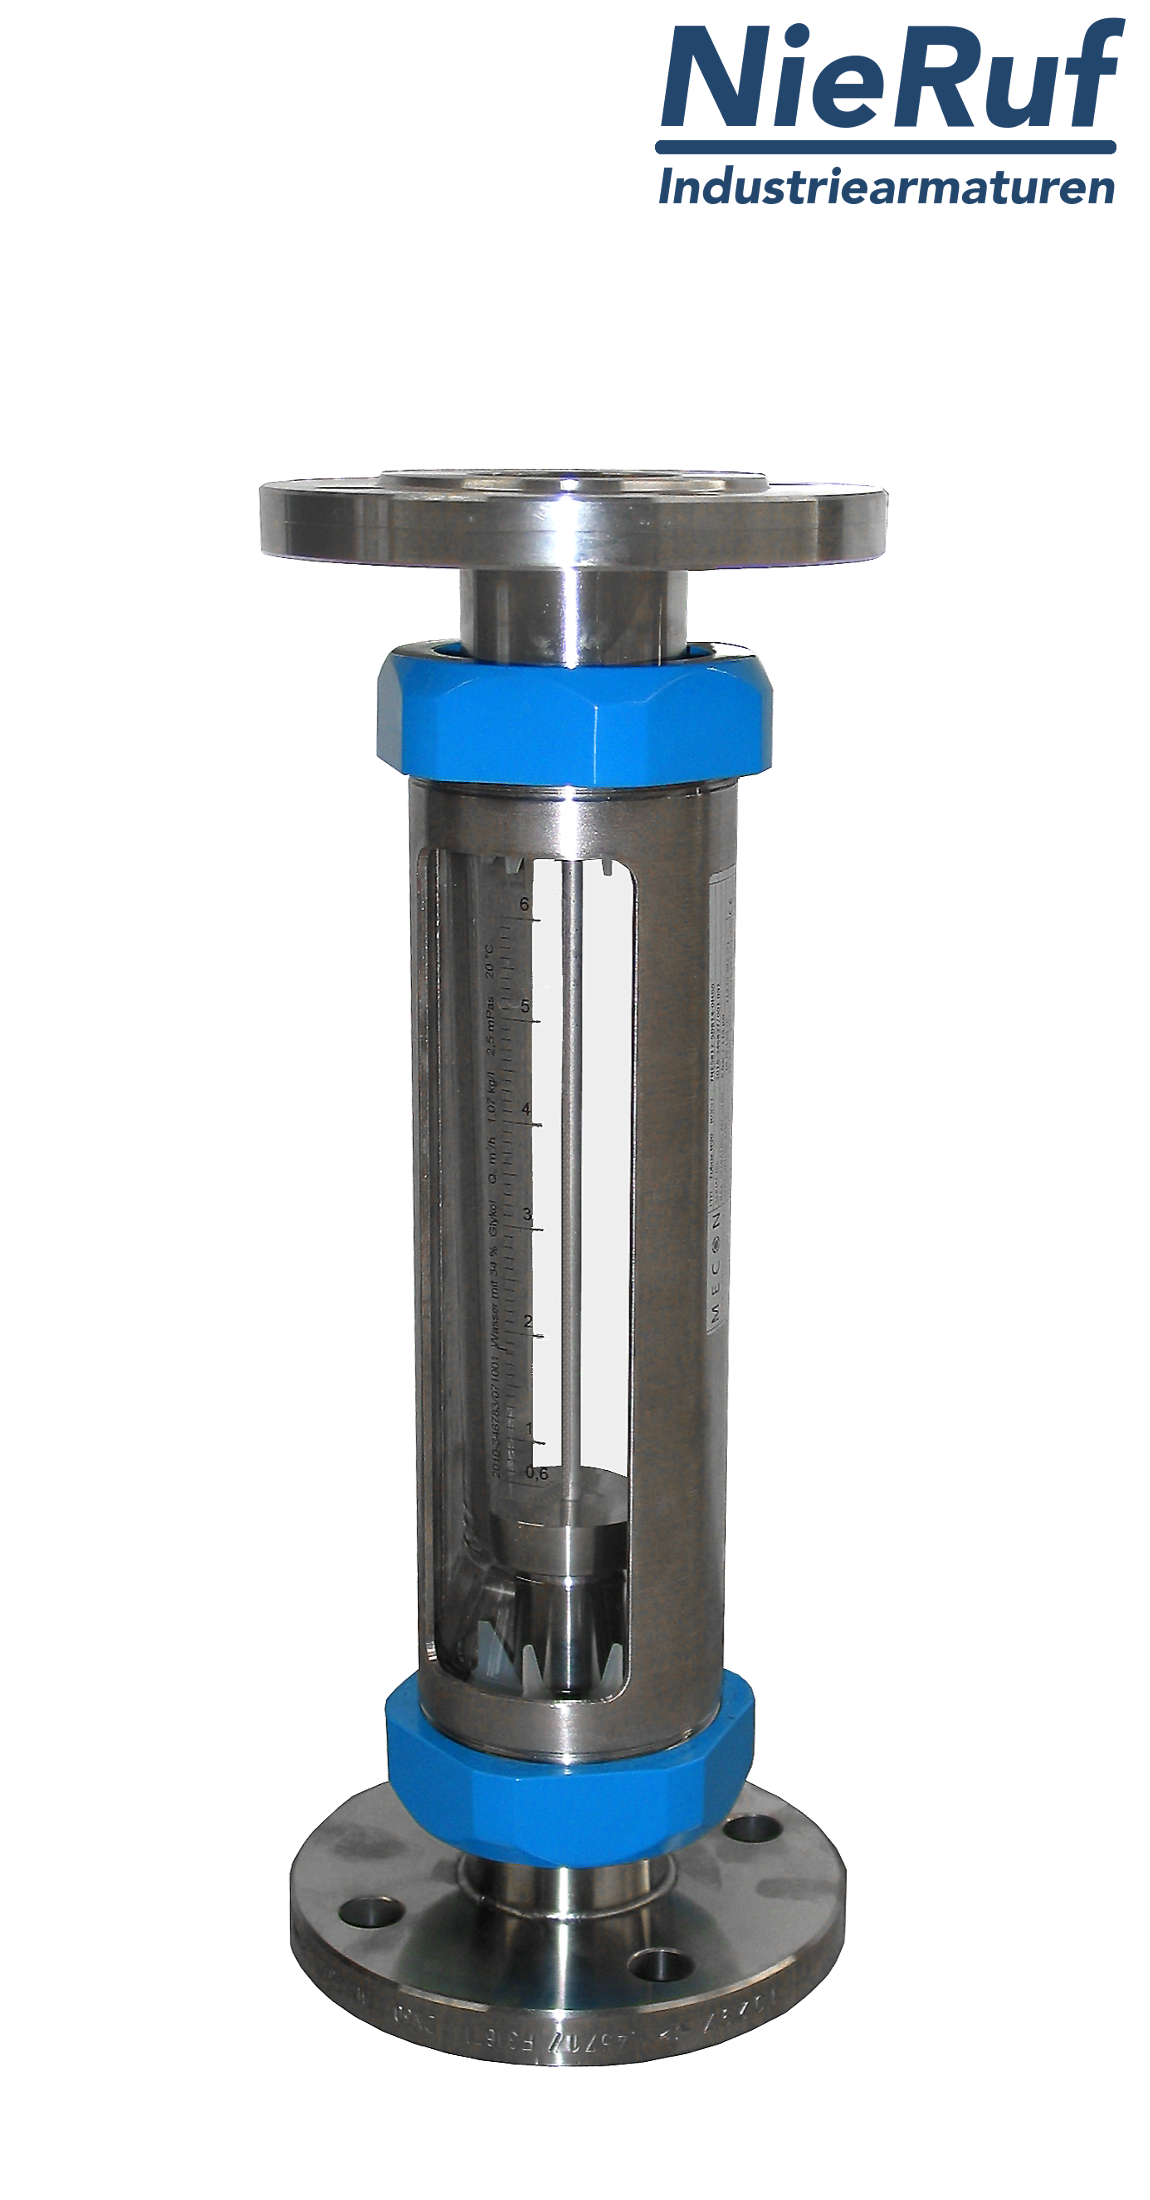 Variable area flowmeter stainless steel + borosilicate flange DN20 2.5 - 25.0 l/h water FKM